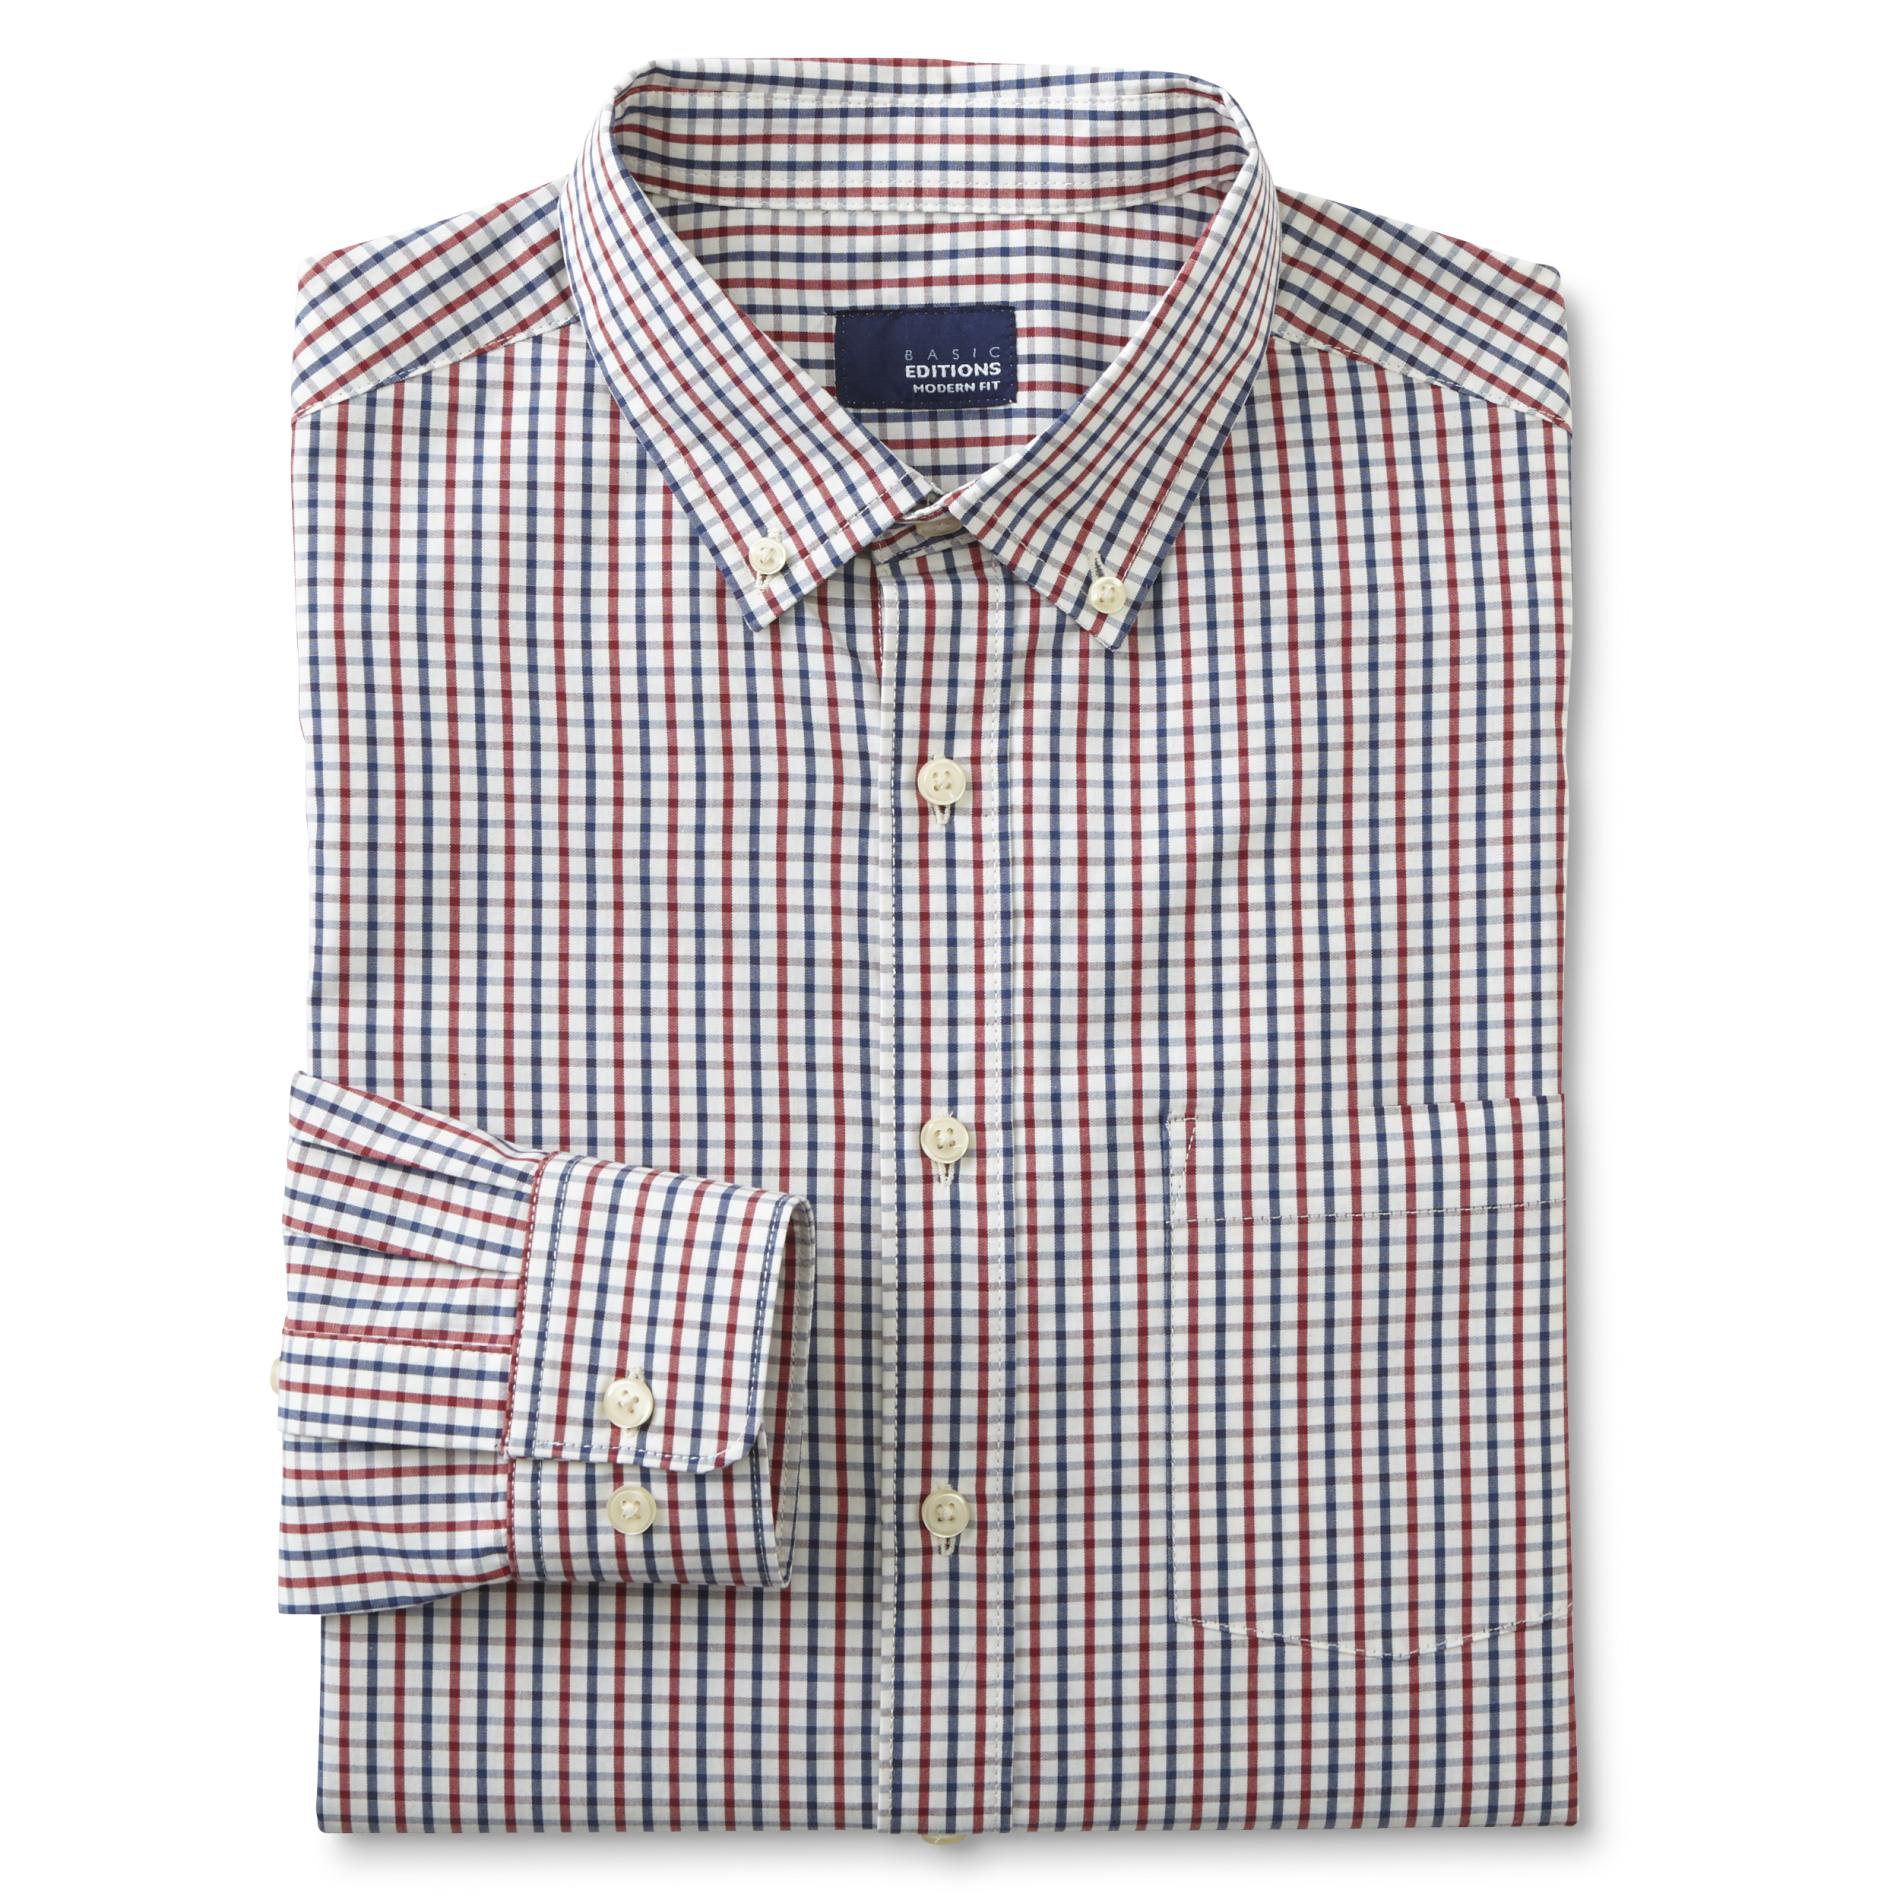 Basic Editions Men's Big & Tall Button-Front Shirt - Checkered